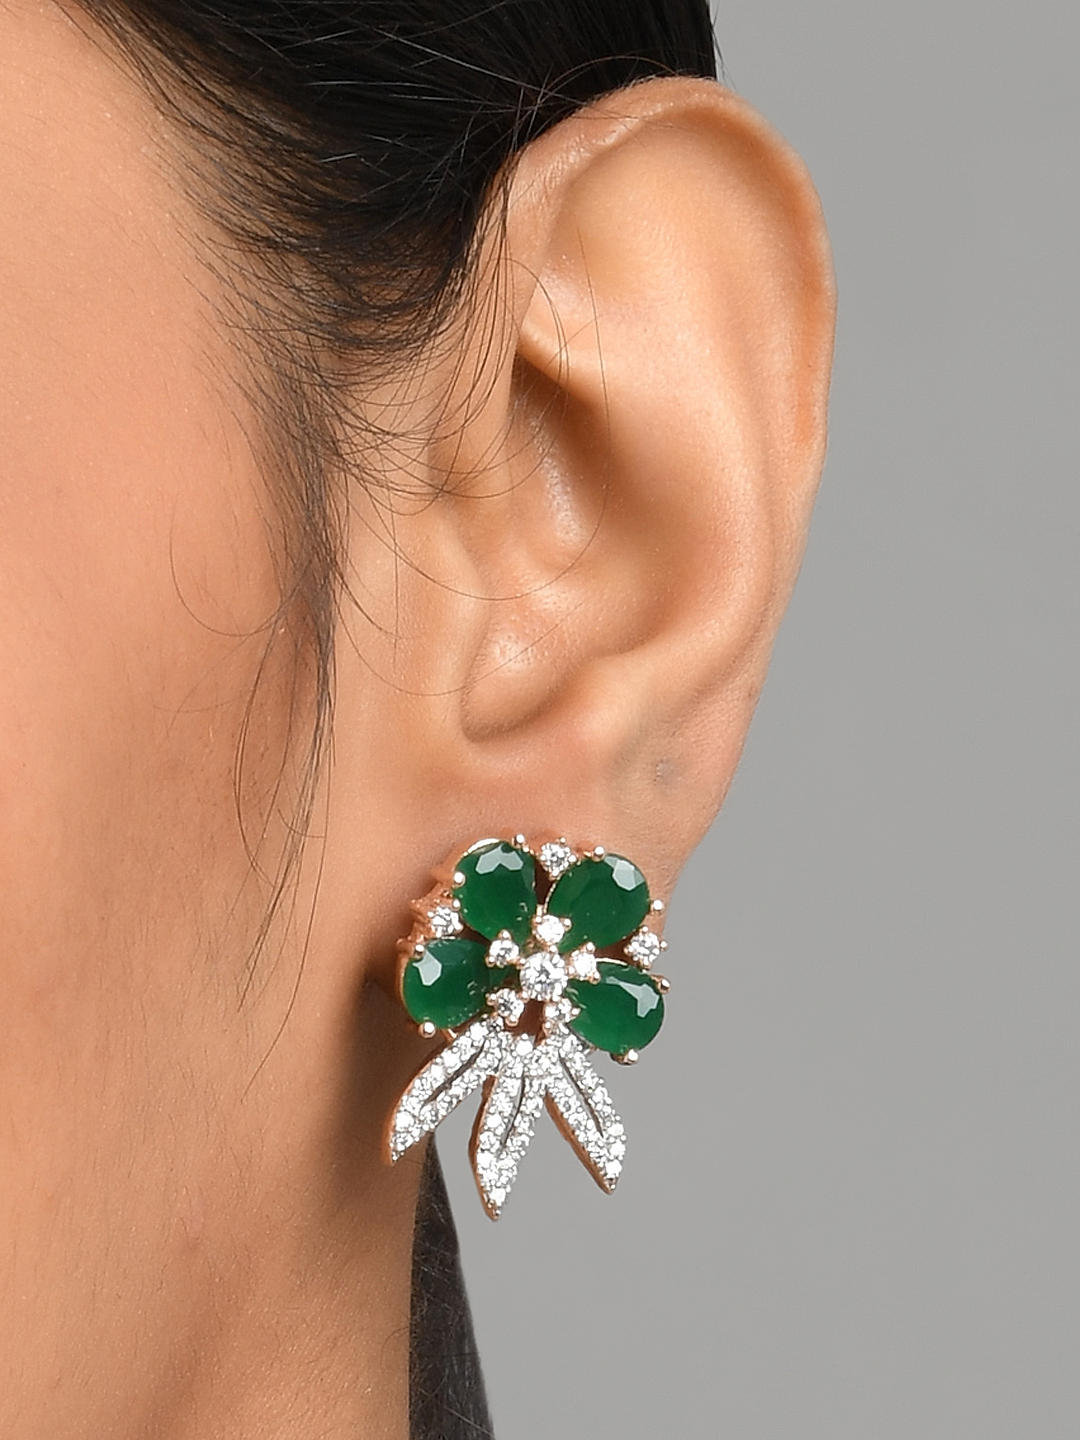 Buy The Millennium Gallery Natural Emerald Stone Earrings Original  Certified Panna Stone Earrings Lighweight Emerald Gold Earrings Real Emerald  Ear Studs Pure Green Emerald Ear Tops Princess Cut Earrings at Amazon.in